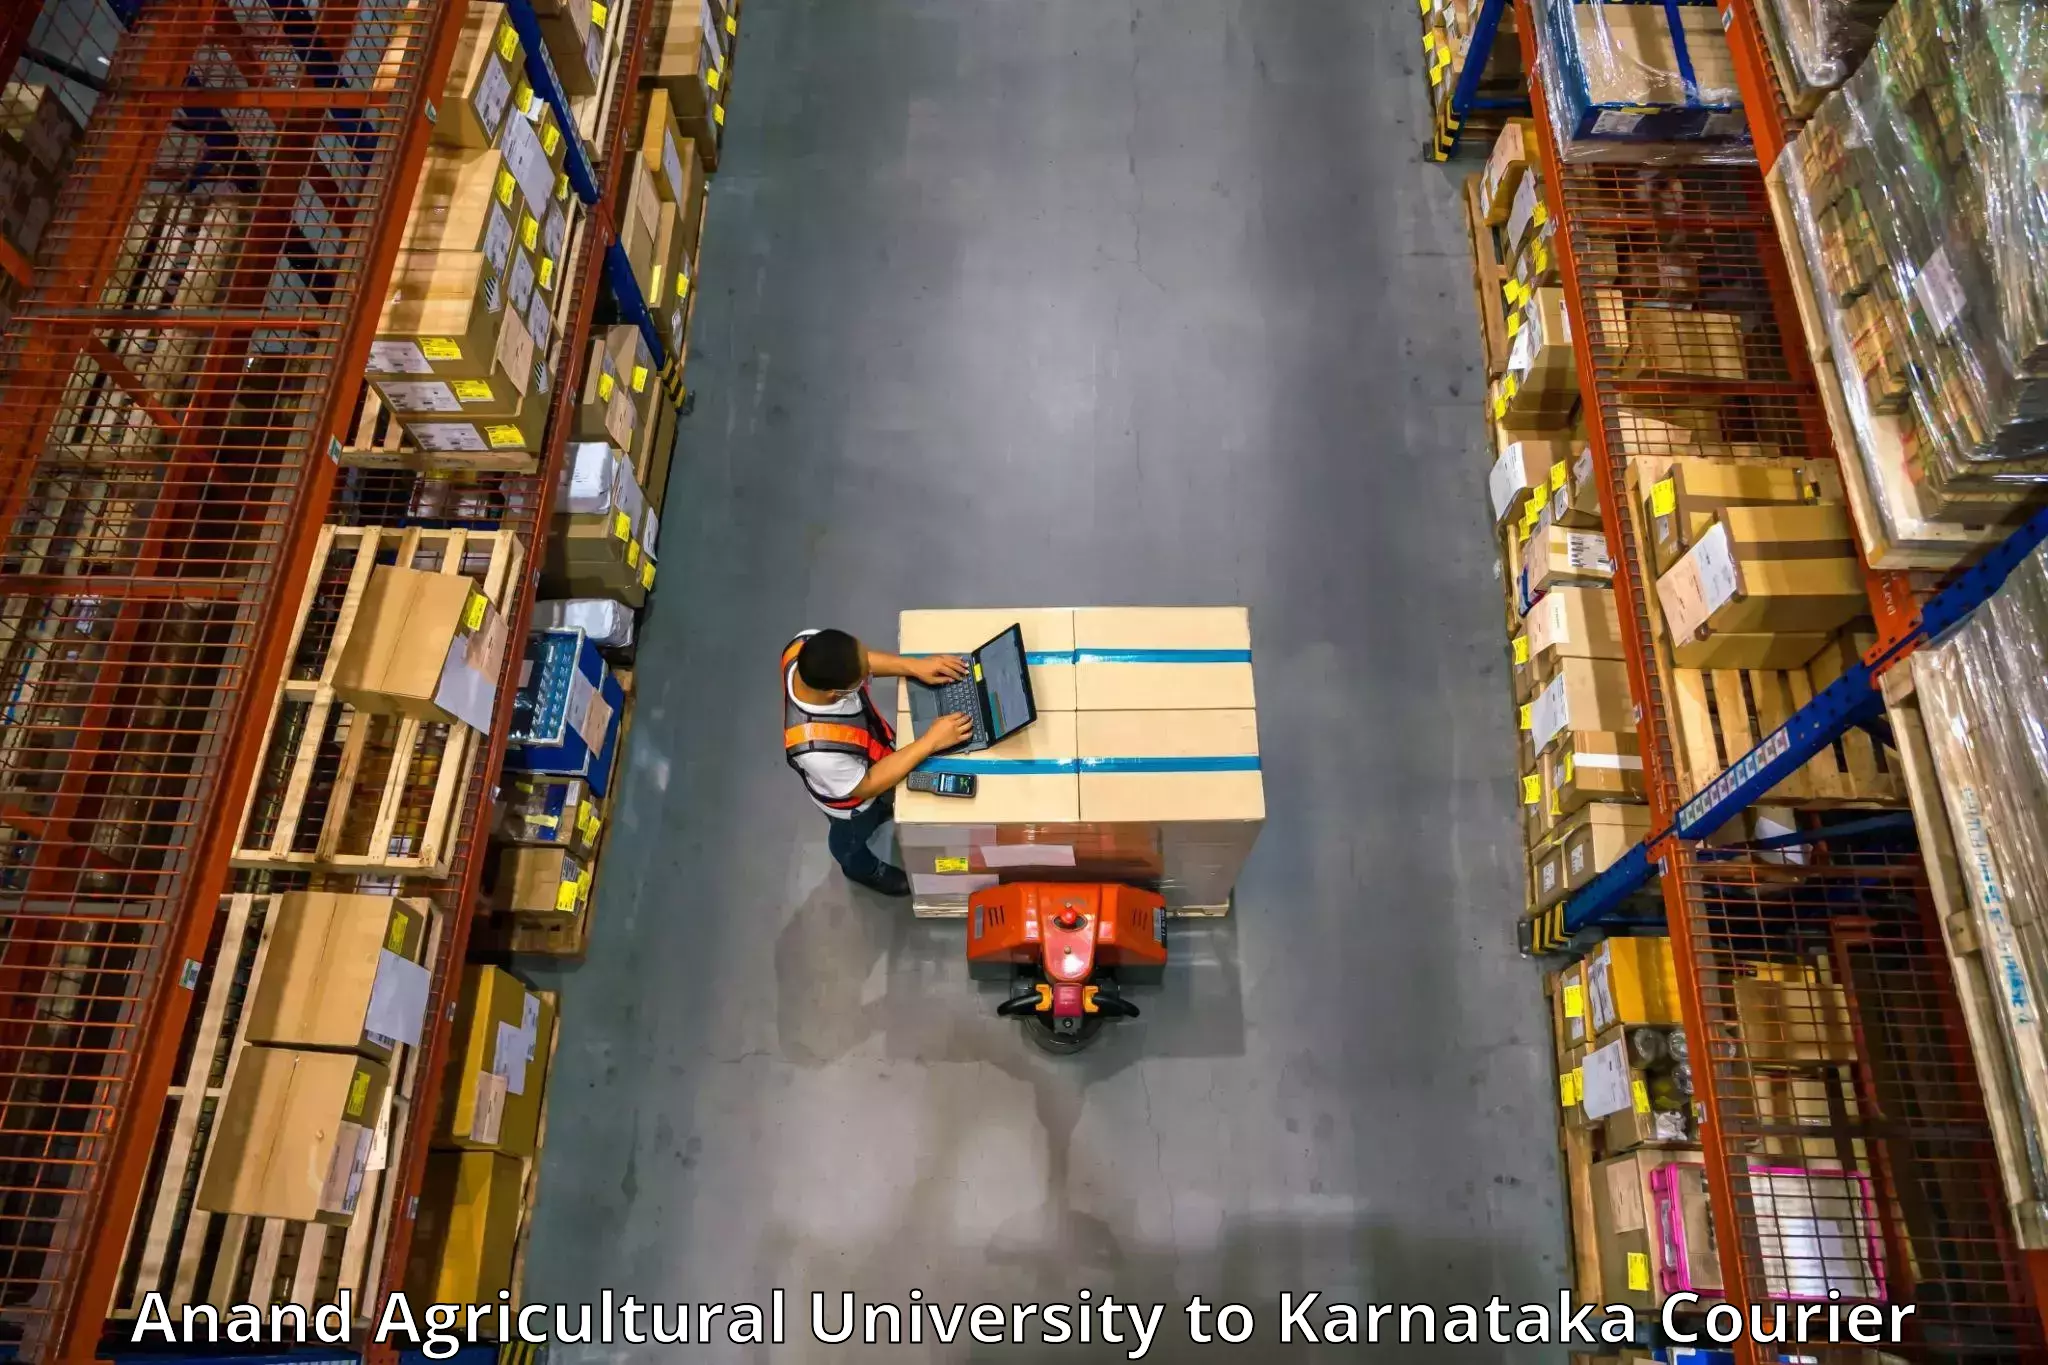 Comprehensive moving assistance Anand Agricultural University to Bangarapet